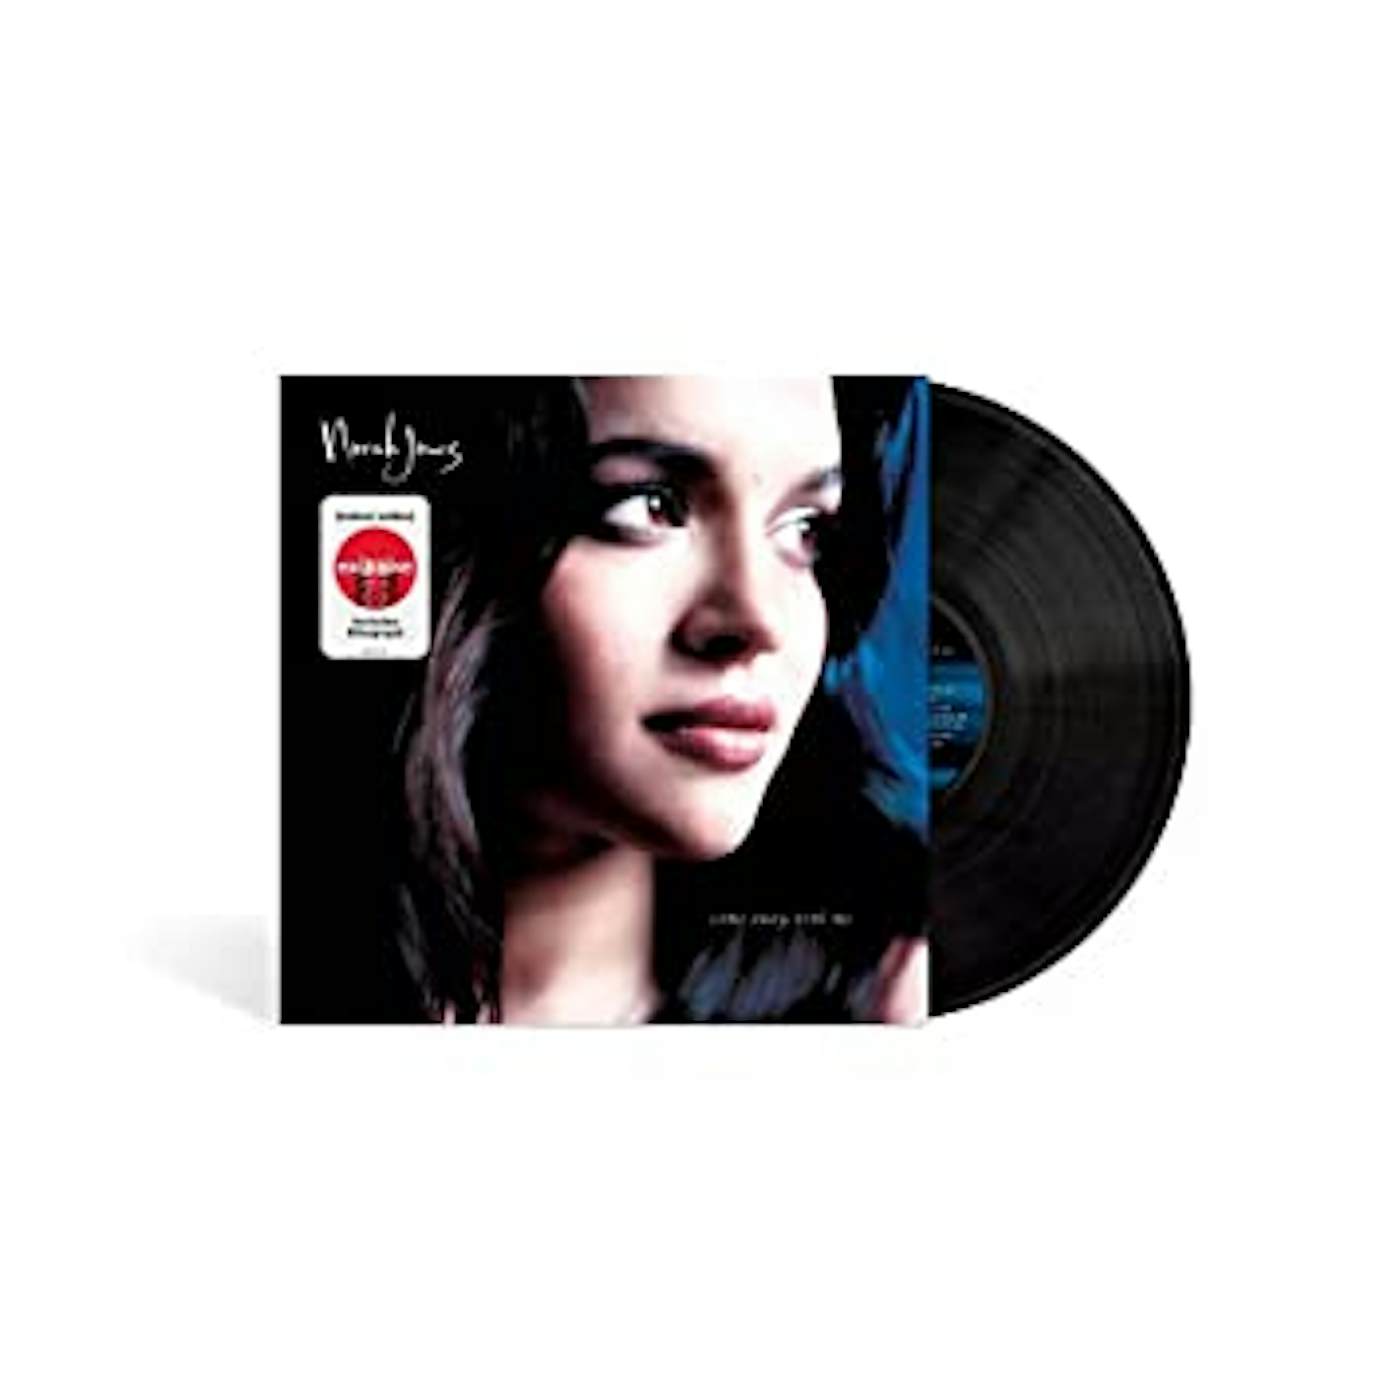 Norah Jones Come Away With Me (20th Anniversary) LP w/ Lithograph